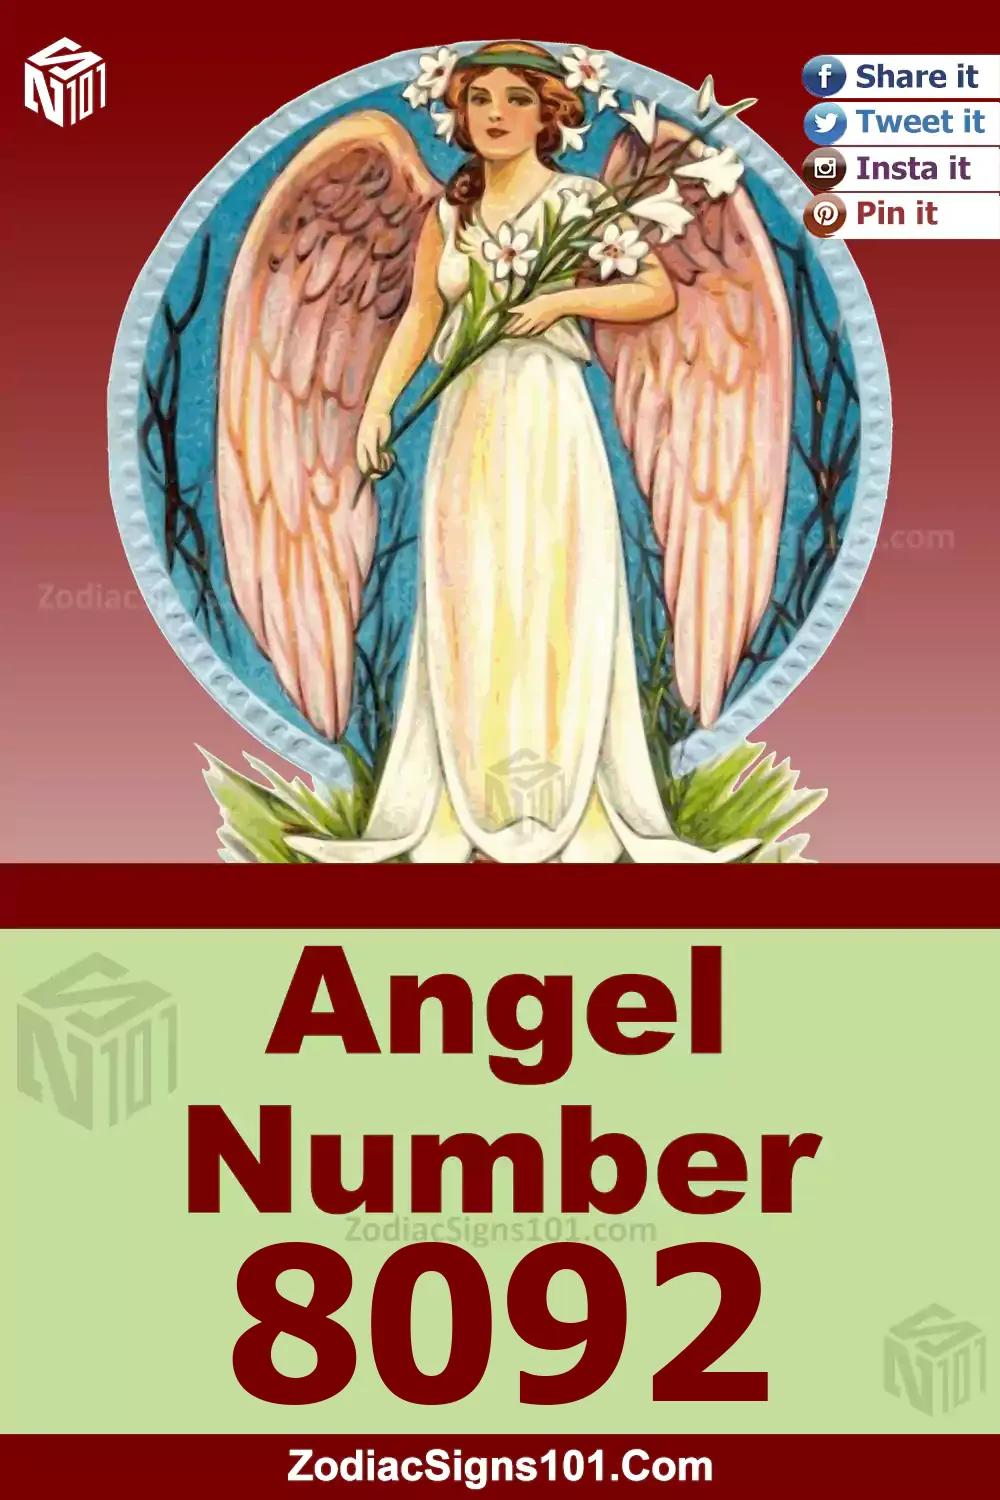 8092 Angel Number Meaning